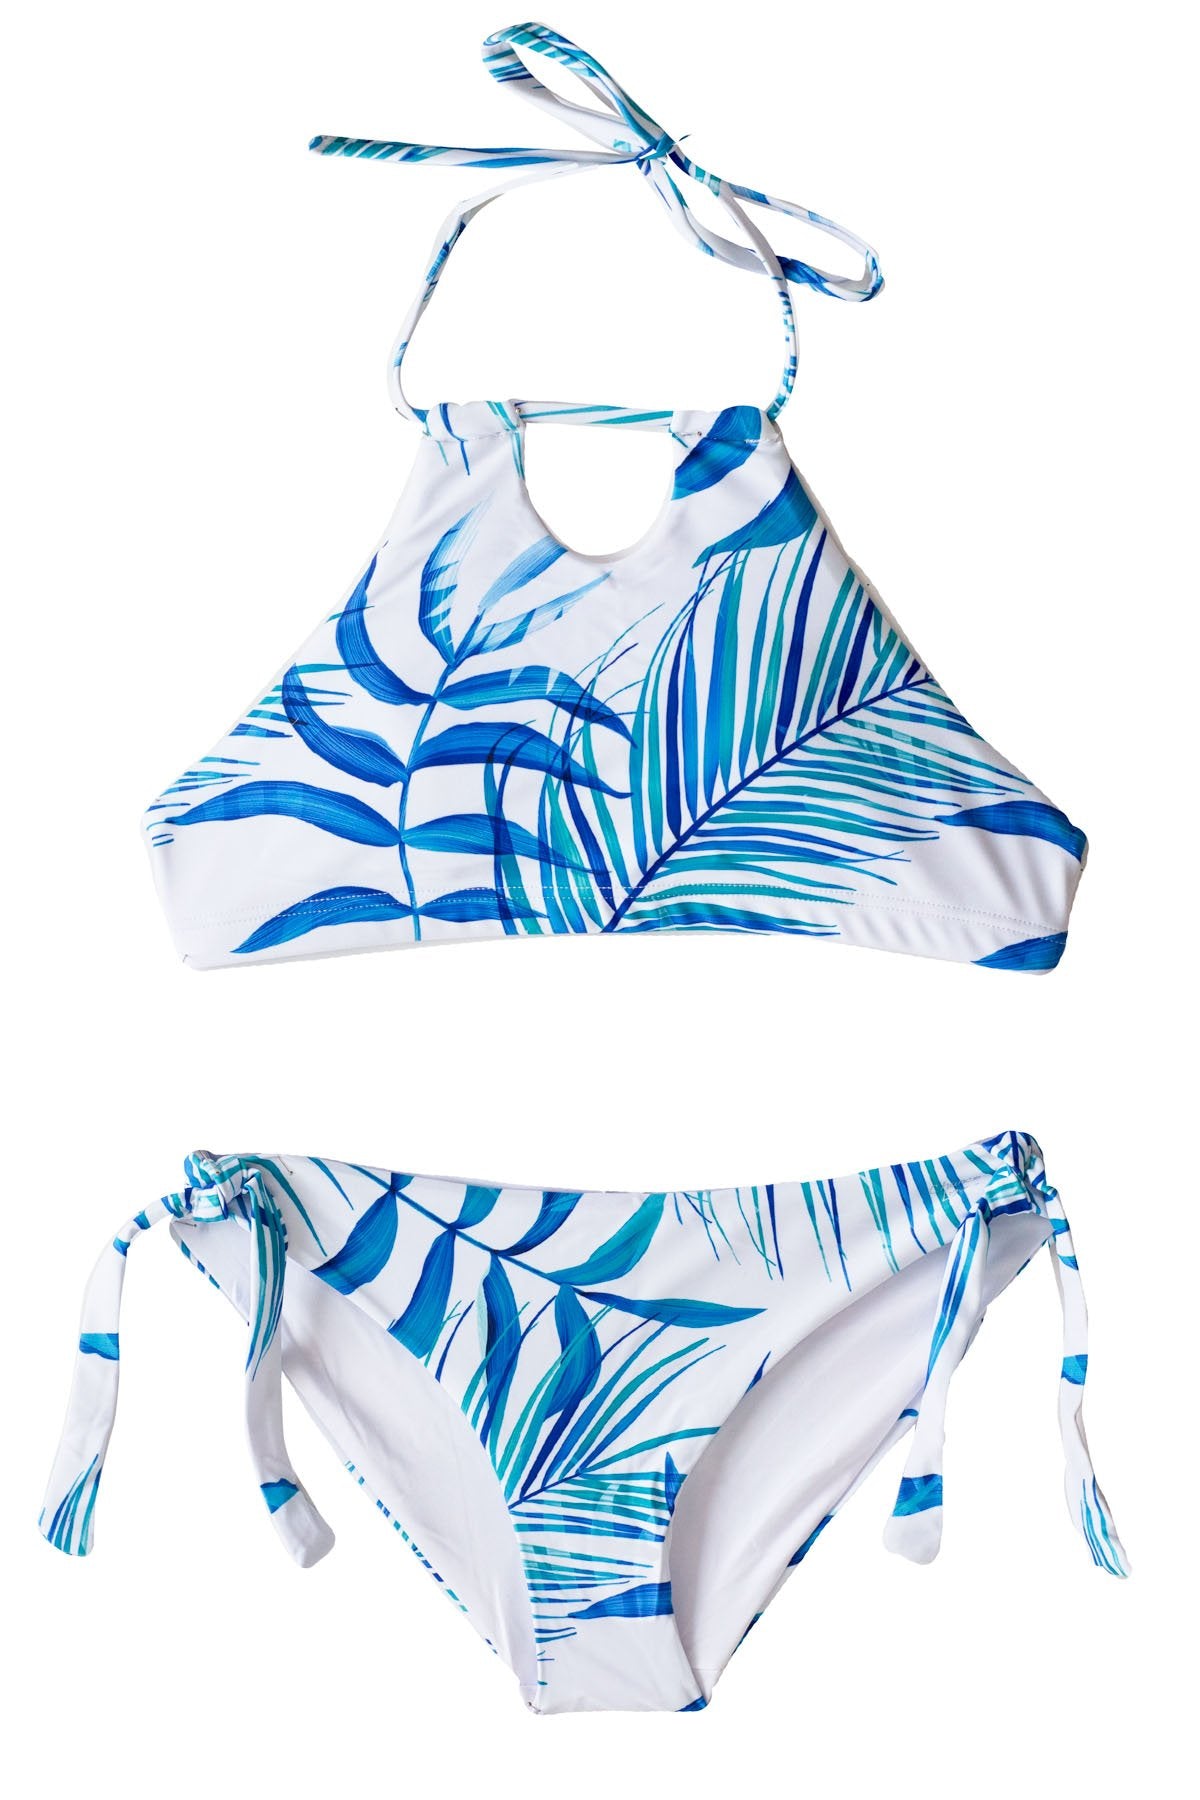 High Quality Reversible Two Piece Bikini Swimsuit Set with Blue and Teal Palm Leaves, Halter top and Full Bottoms